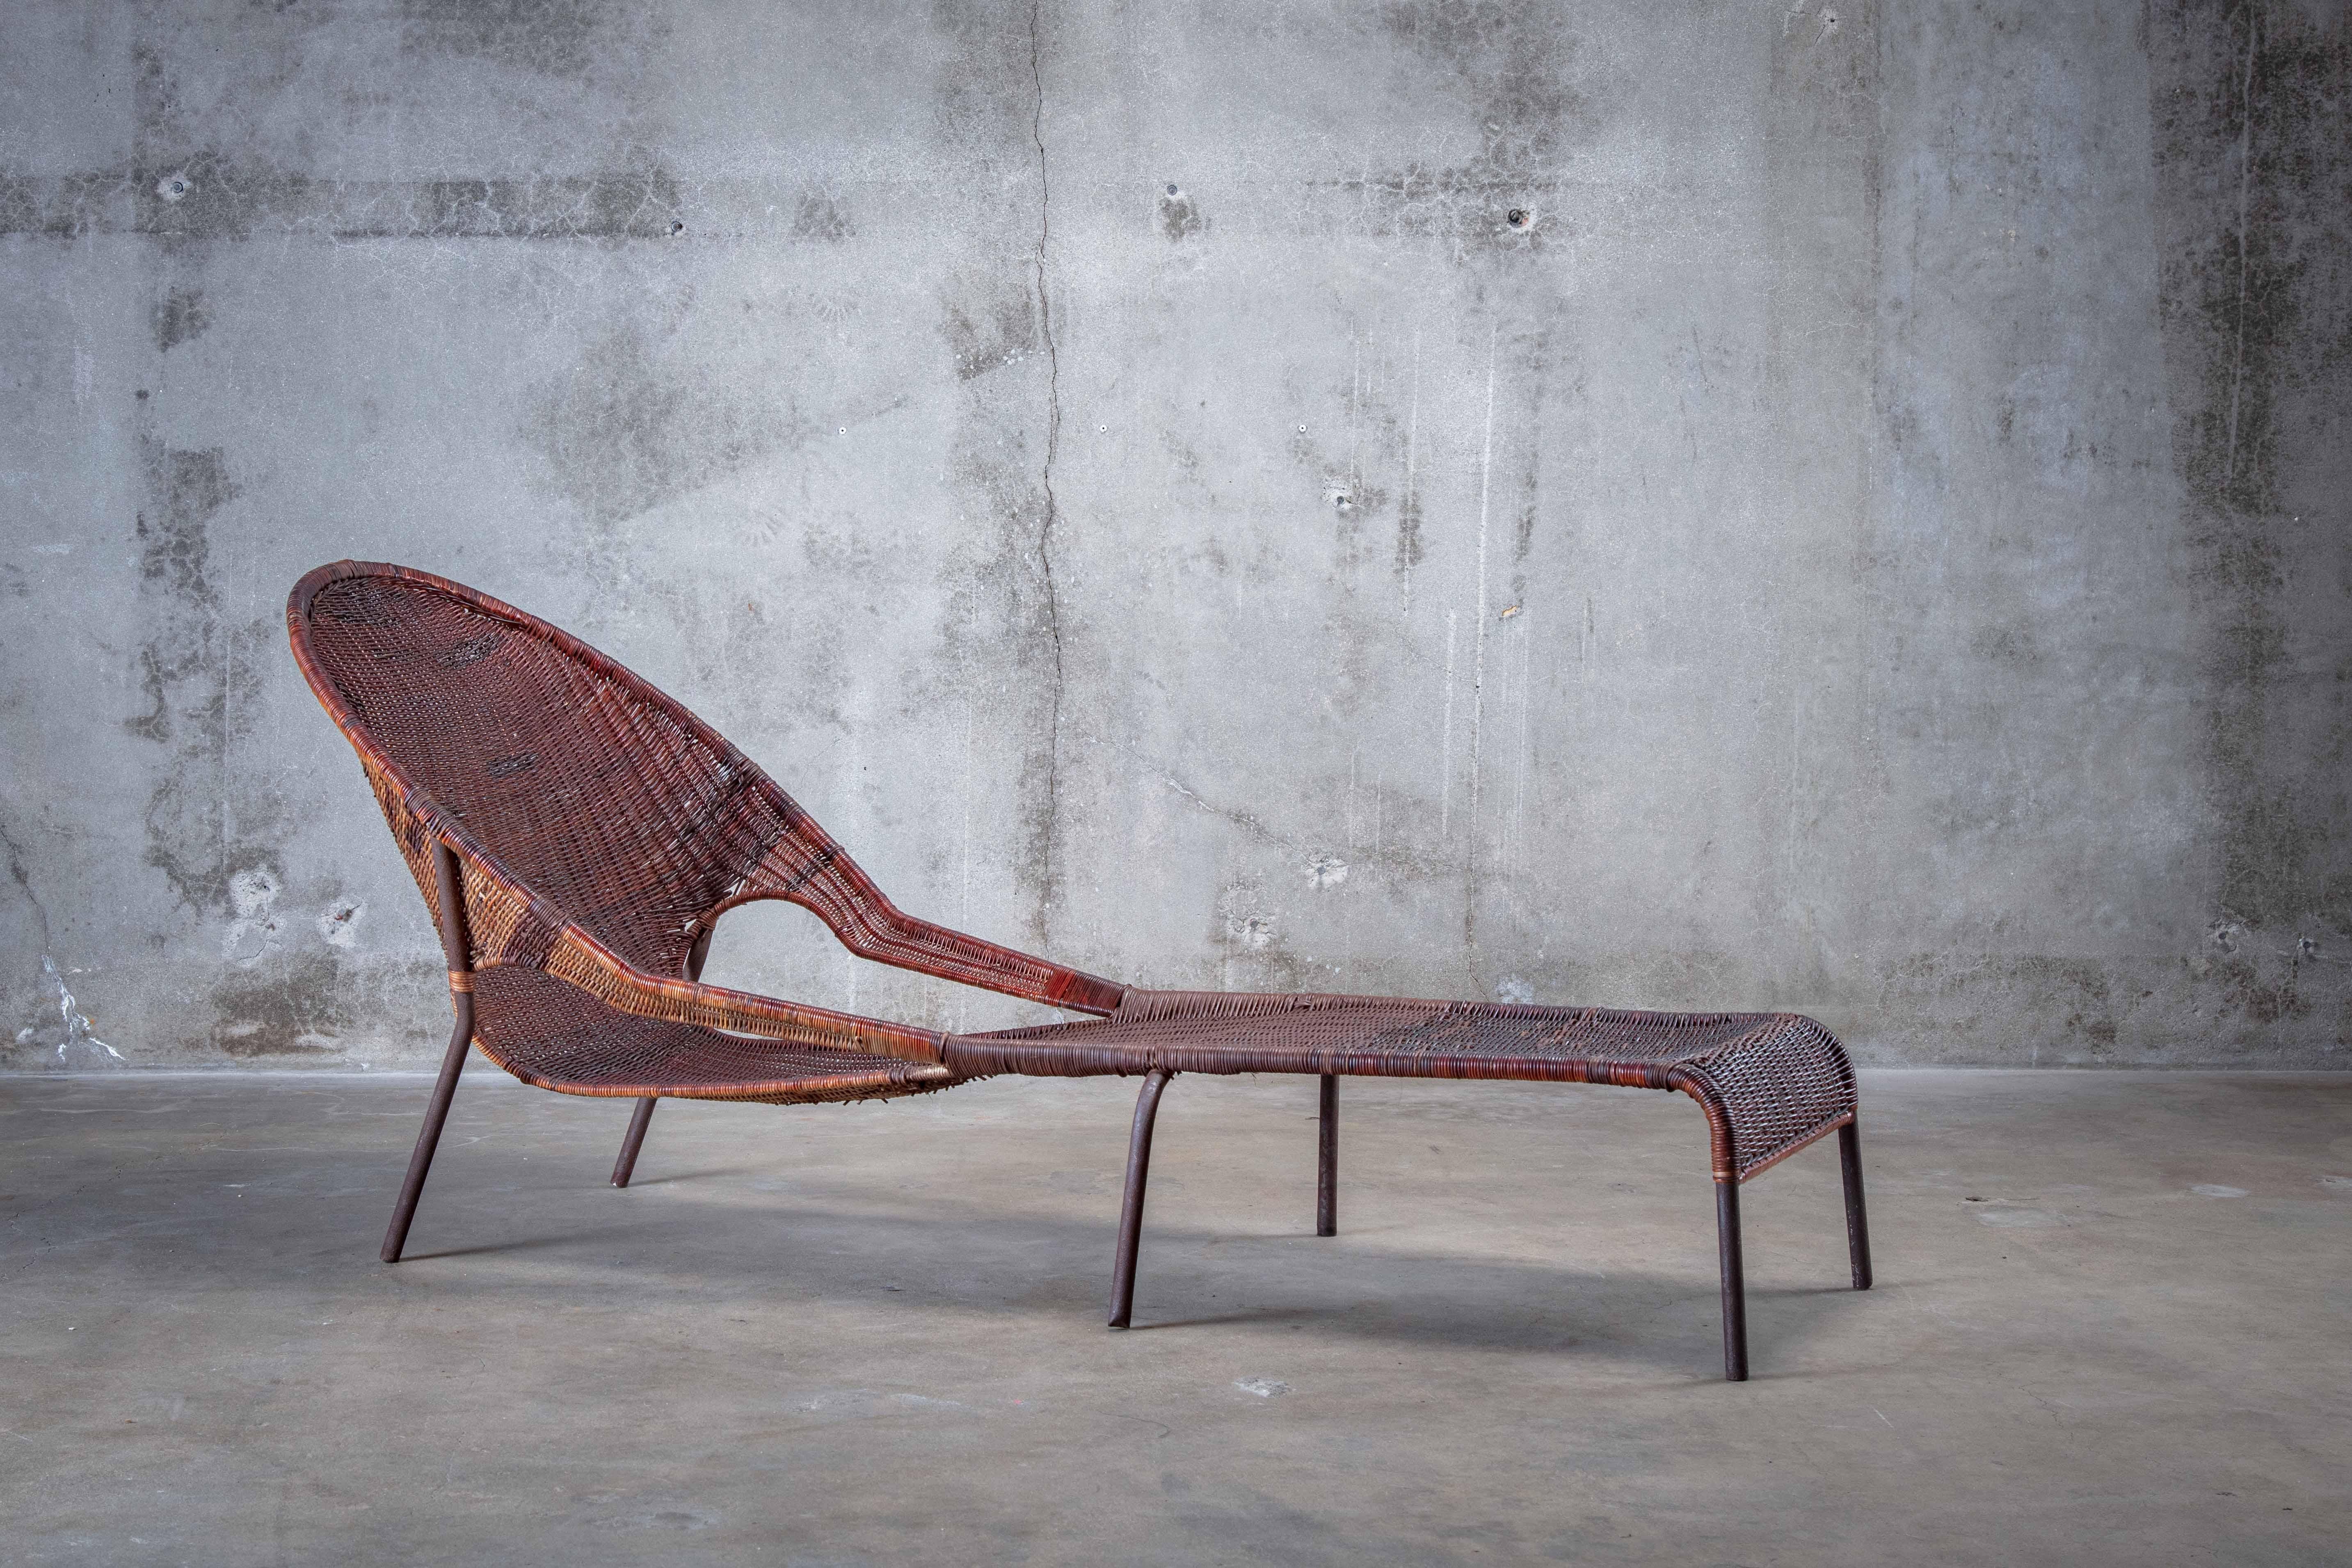 Chaise Lounge in waker and metal by Francis Mair 1960s. United States, CA.

Measure: Seat height 10 inches.